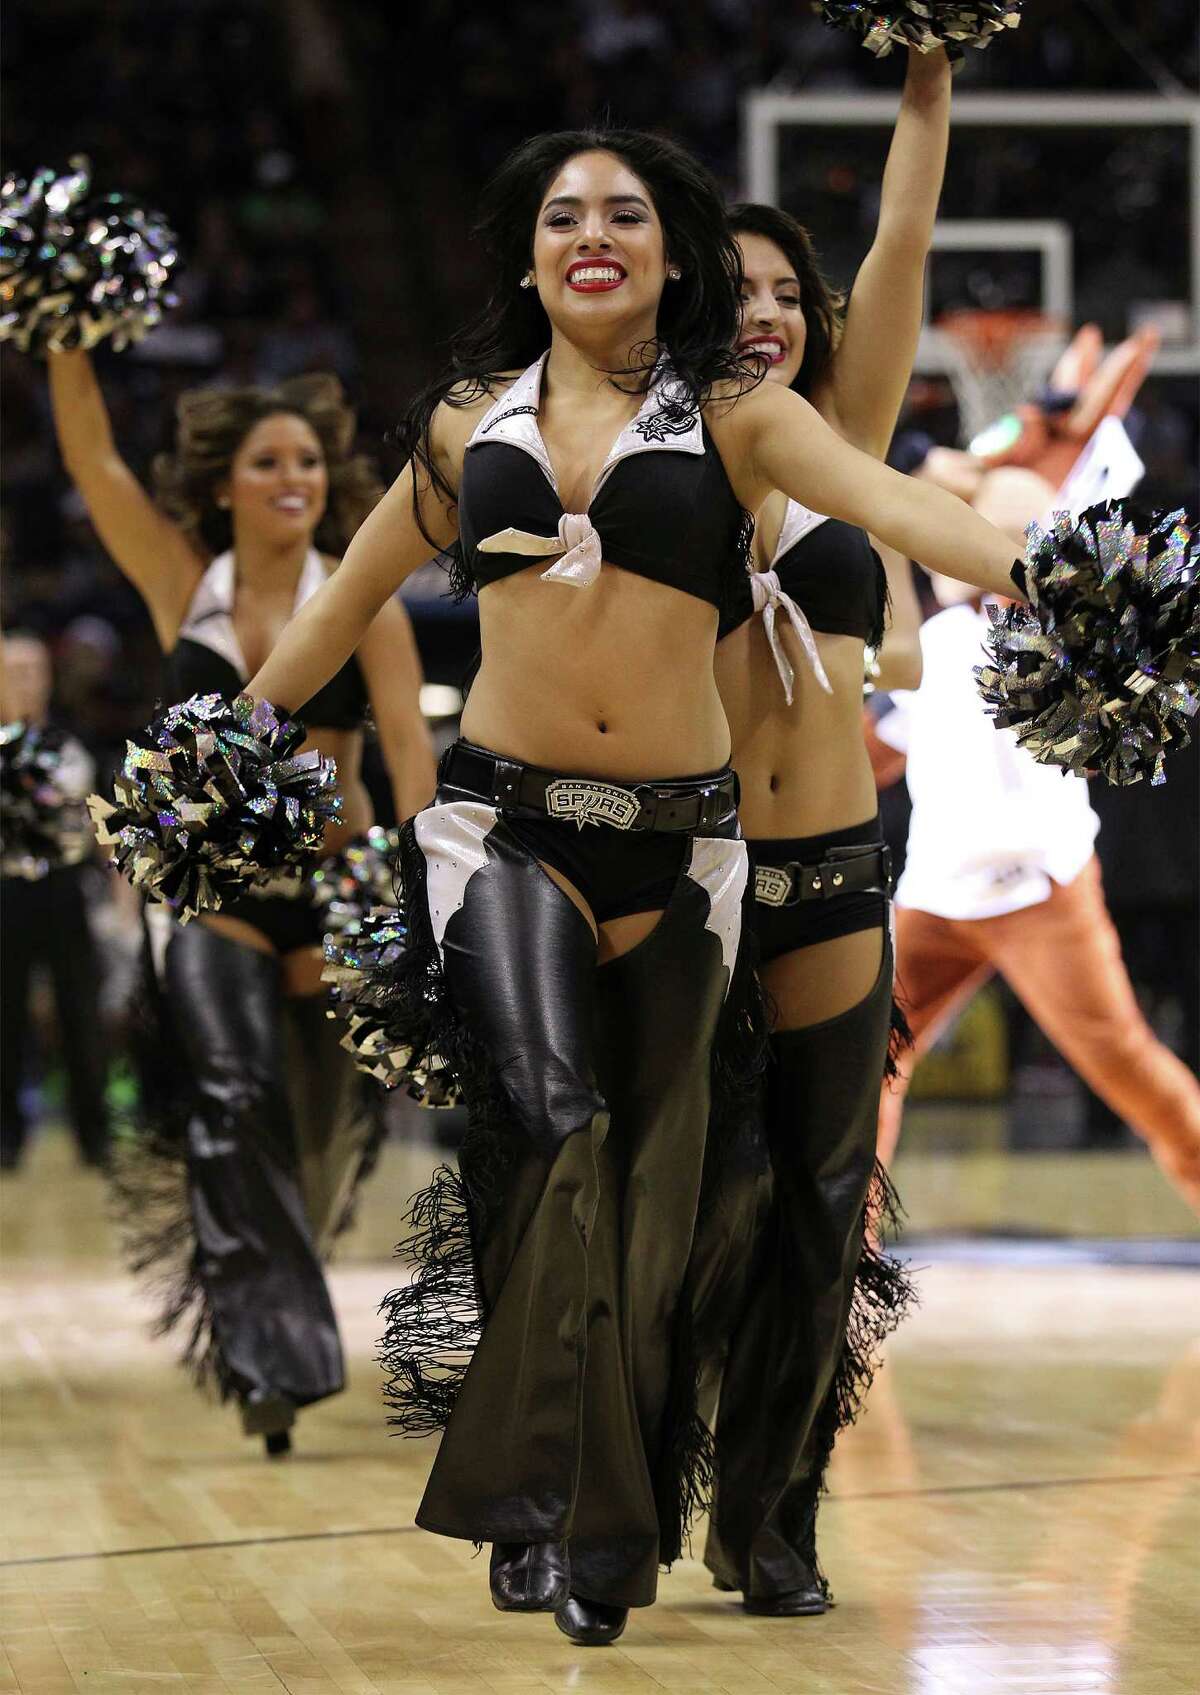 The Spurs' Silverdancers perform during a timeout in the game against the Sacramento Kings at the AT&T Center on Friday, Nov. 28, 2014. Spurs defeat the Kings 112-104. (Kin Man Hui/San Antonio Express-News)